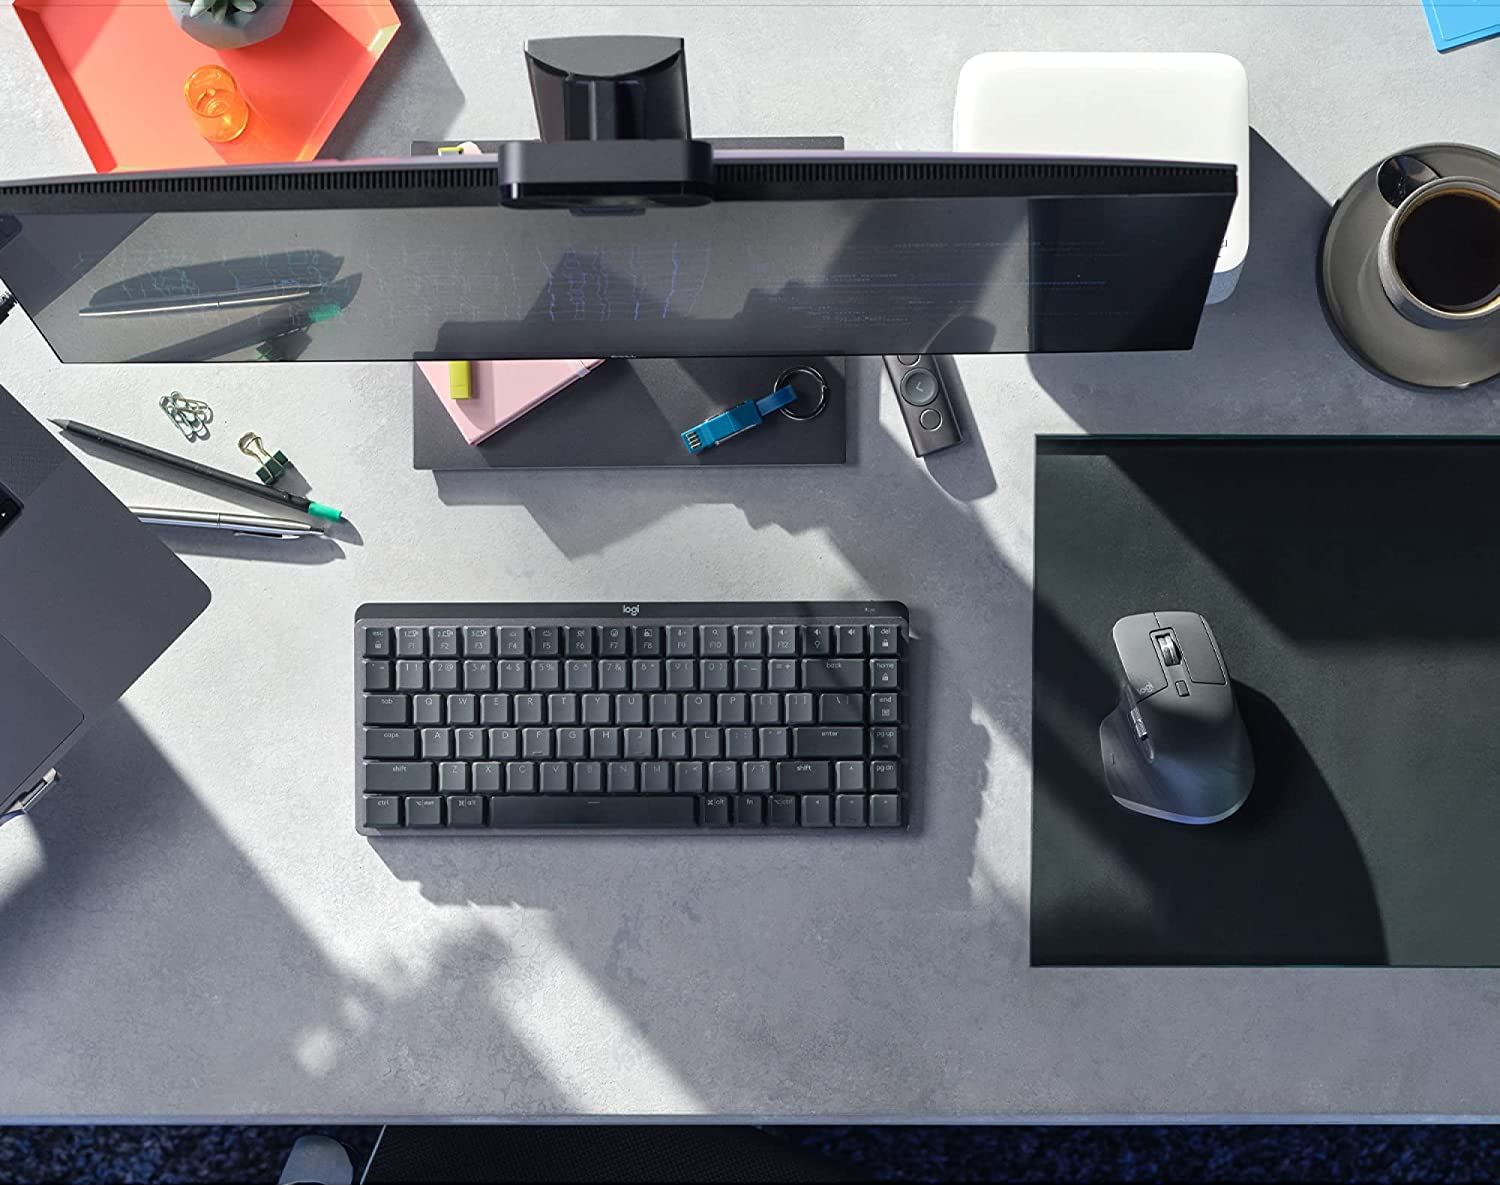 the mechanical keyboard on the desk